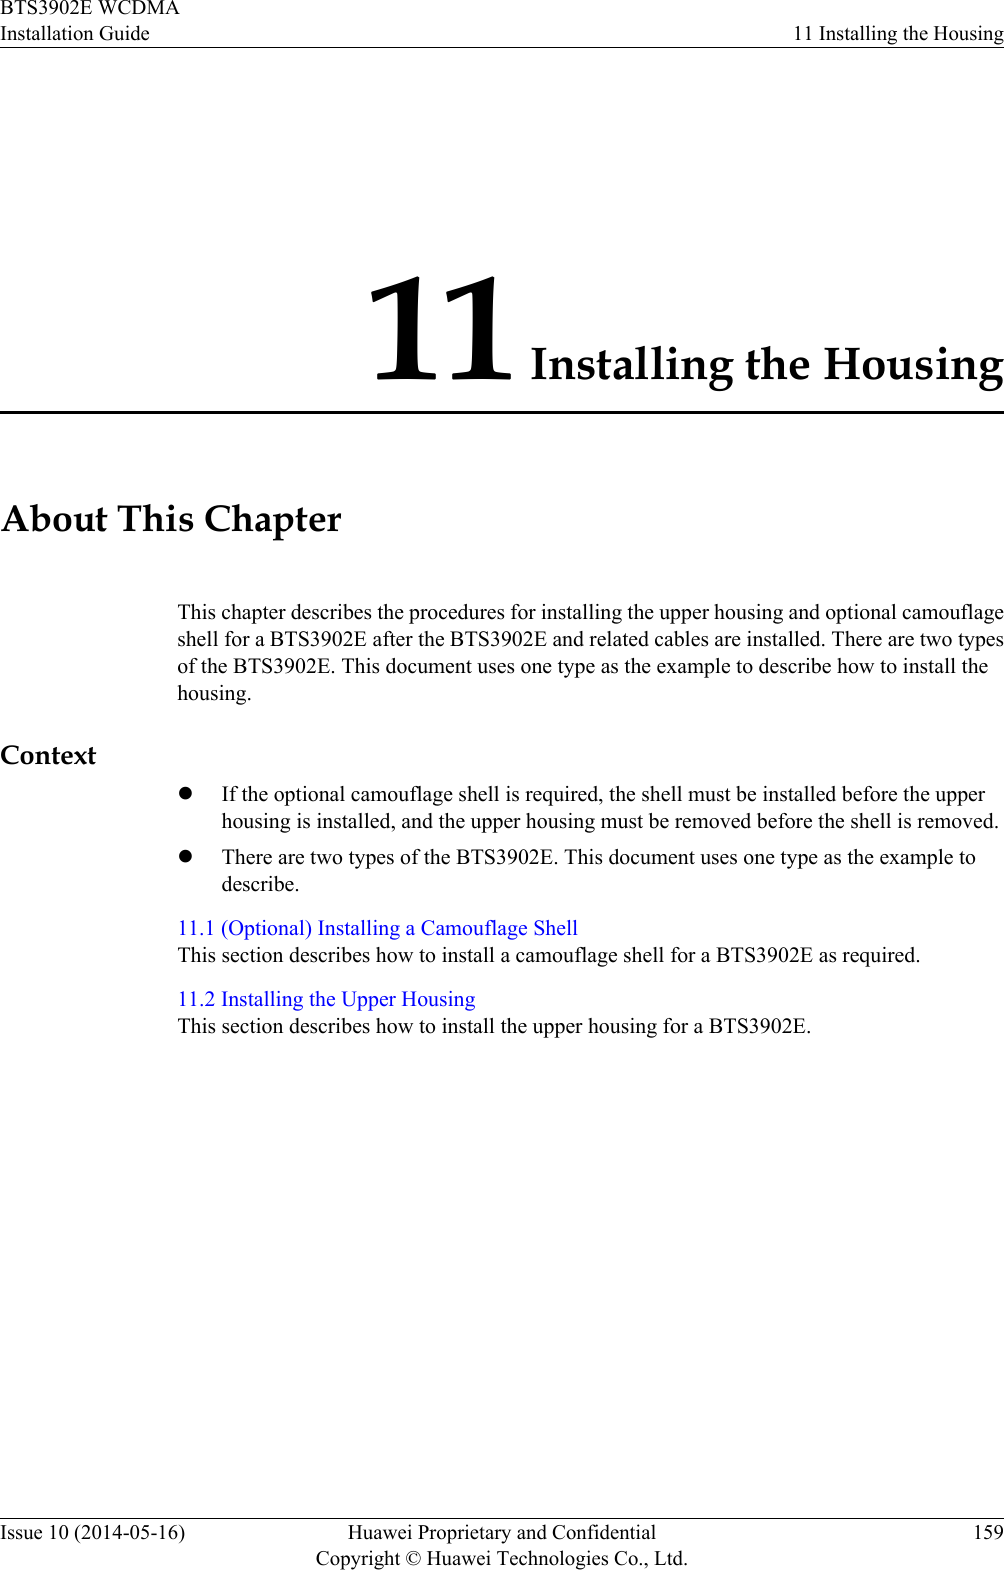 11 Installing the HousingAbout This ChapterThis chapter describes the procedures for installing the upper housing and optional camouflageshell for a BTS3902E after the BTS3902E and related cables are installed. There are two typesof the BTS3902E. This document uses one type as the example to describe how to install thehousing.ContextlIf the optional camouflage shell is required, the shell must be installed before the upperhousing is installed, and the upper housing must be removed before the shell is removed.lThere are two types of the BTS3902E. This document uses one type as the example todescribe.11.1 (Optional) Installing a Camouflage ShellThis section describes how to install a camouflage shell for a BTS3902E as required.11.2 Installing the Upper HousingThis section describes how to install the upper housing for a BTS3902E.BTS3902E WCDMAInstallation Guide 11 Installing the HousingIssue 10 (2014-05-16) Huawei Proprietary and ConfidentialCopyright © Huawei Technologies Co., Ltd.159